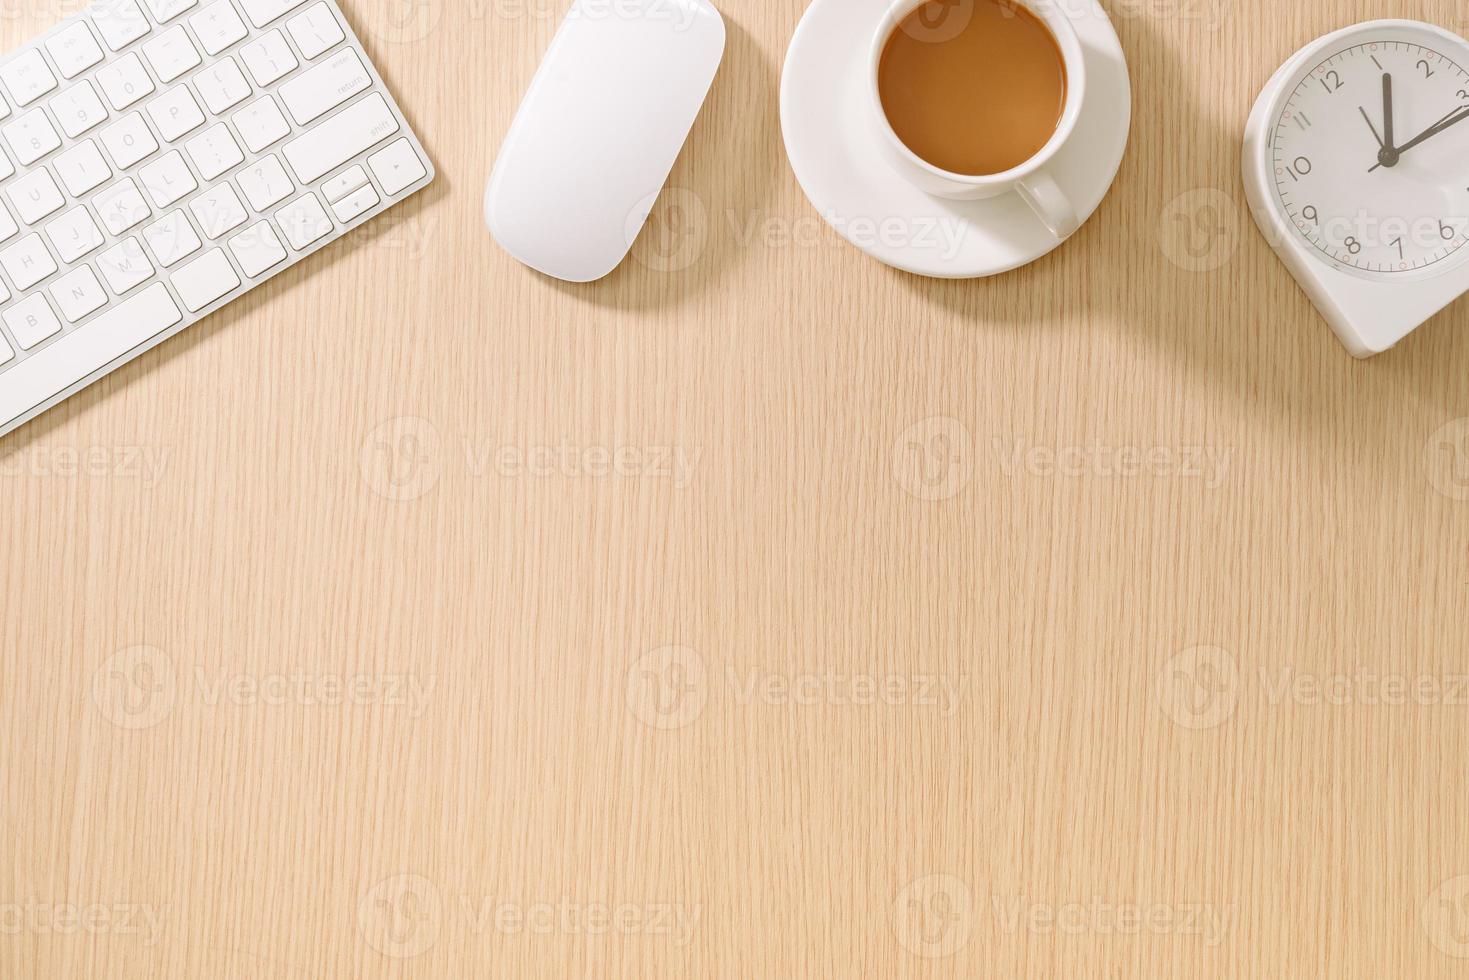 Modern white office desk with keyboard, mouse, oclock and cup of coffee.Top view with copy paste. Business and strategy concept mockup. photo